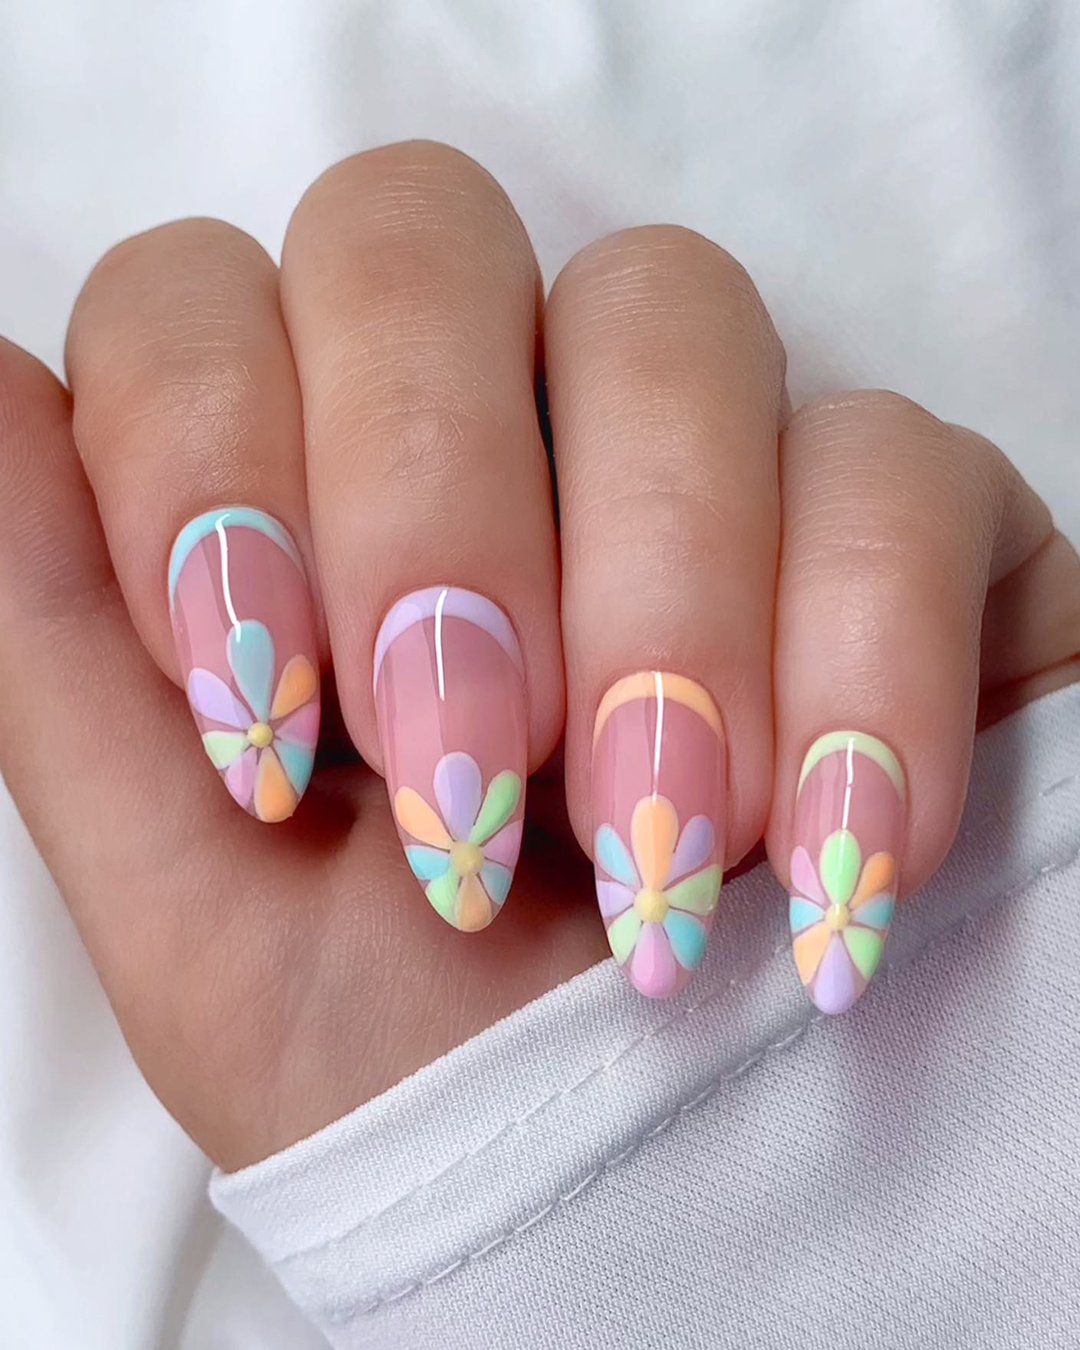 pinterest nails for wedding summer colorful with flowers charsgelnails_